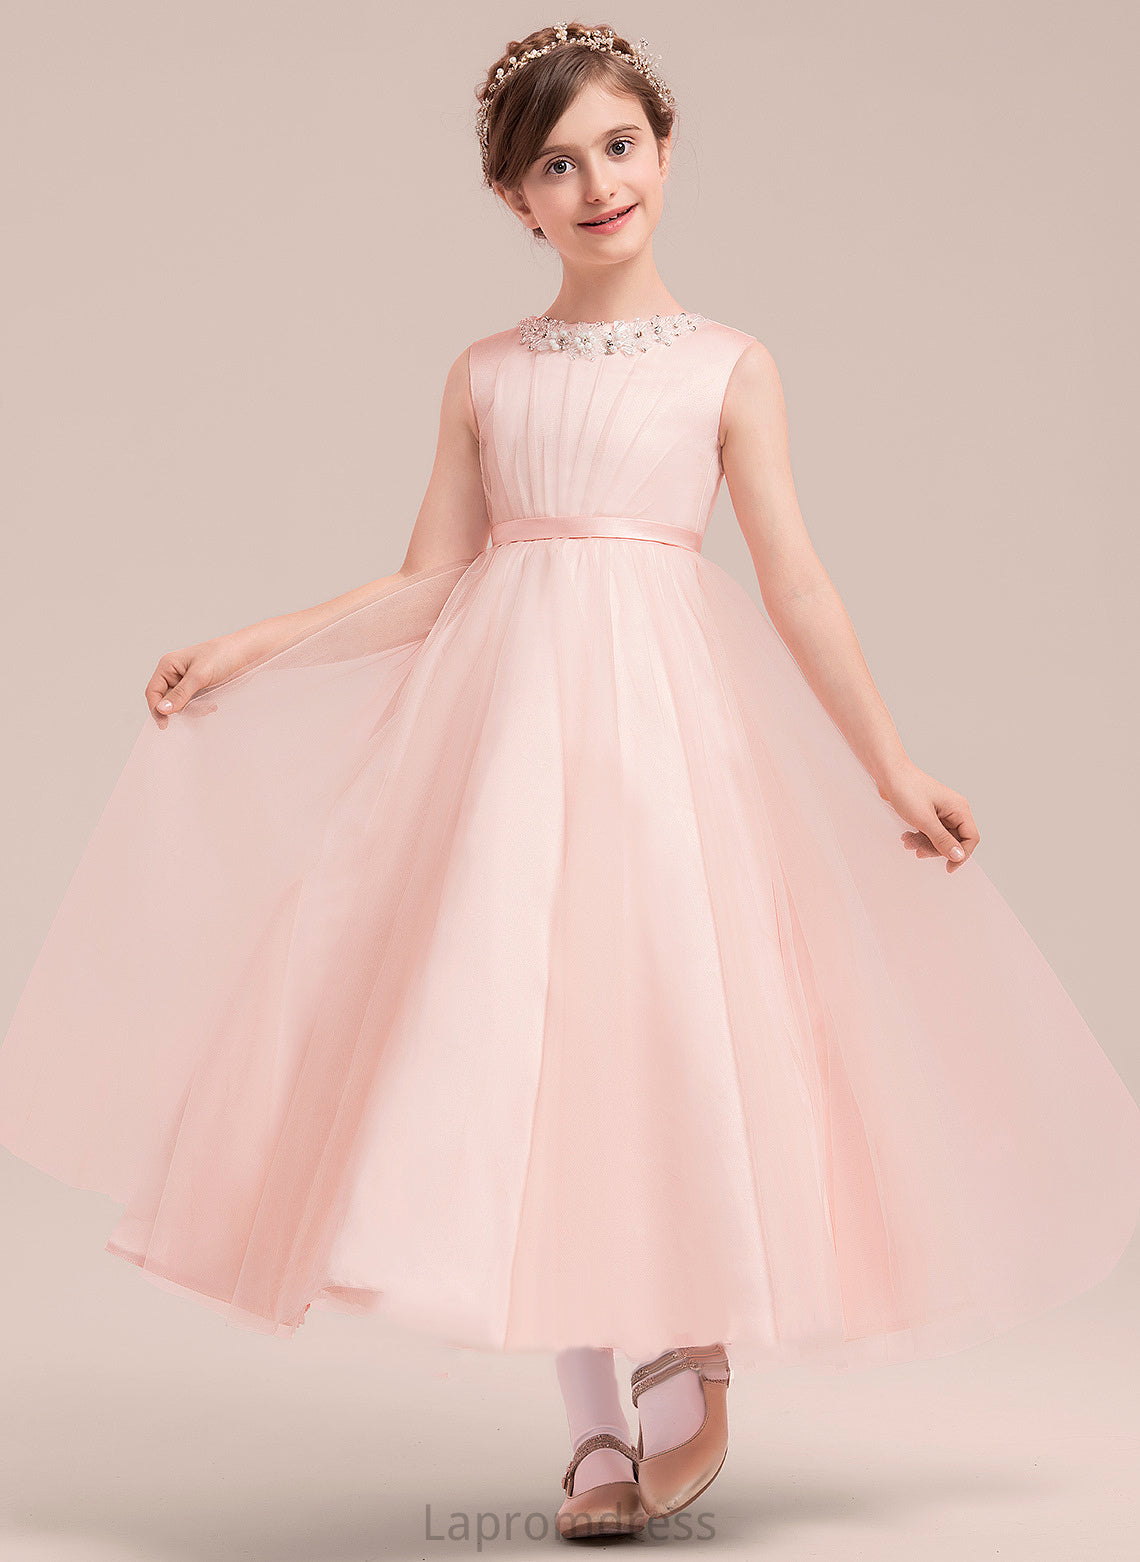 Girl Sleeveless Flower A-Line/Princess Dress Scoop - Flower Girl Dresses Beading/Bow(s) Neck Susie Satin/Tulle With Ankle-length